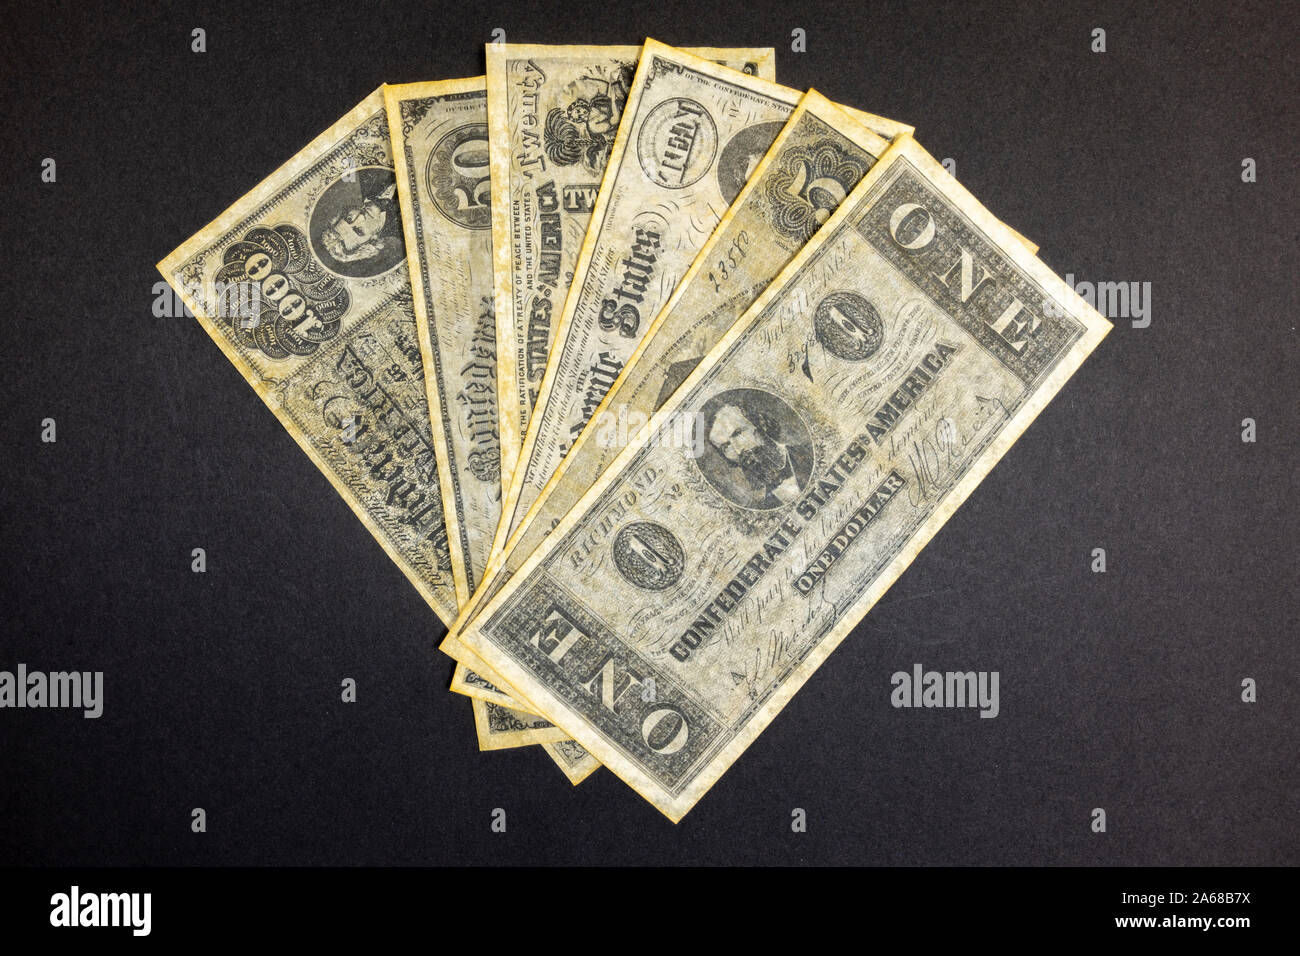 A pile of replica Confederate States of America currency (from the American Civil War 1861-1865). Stock Photo